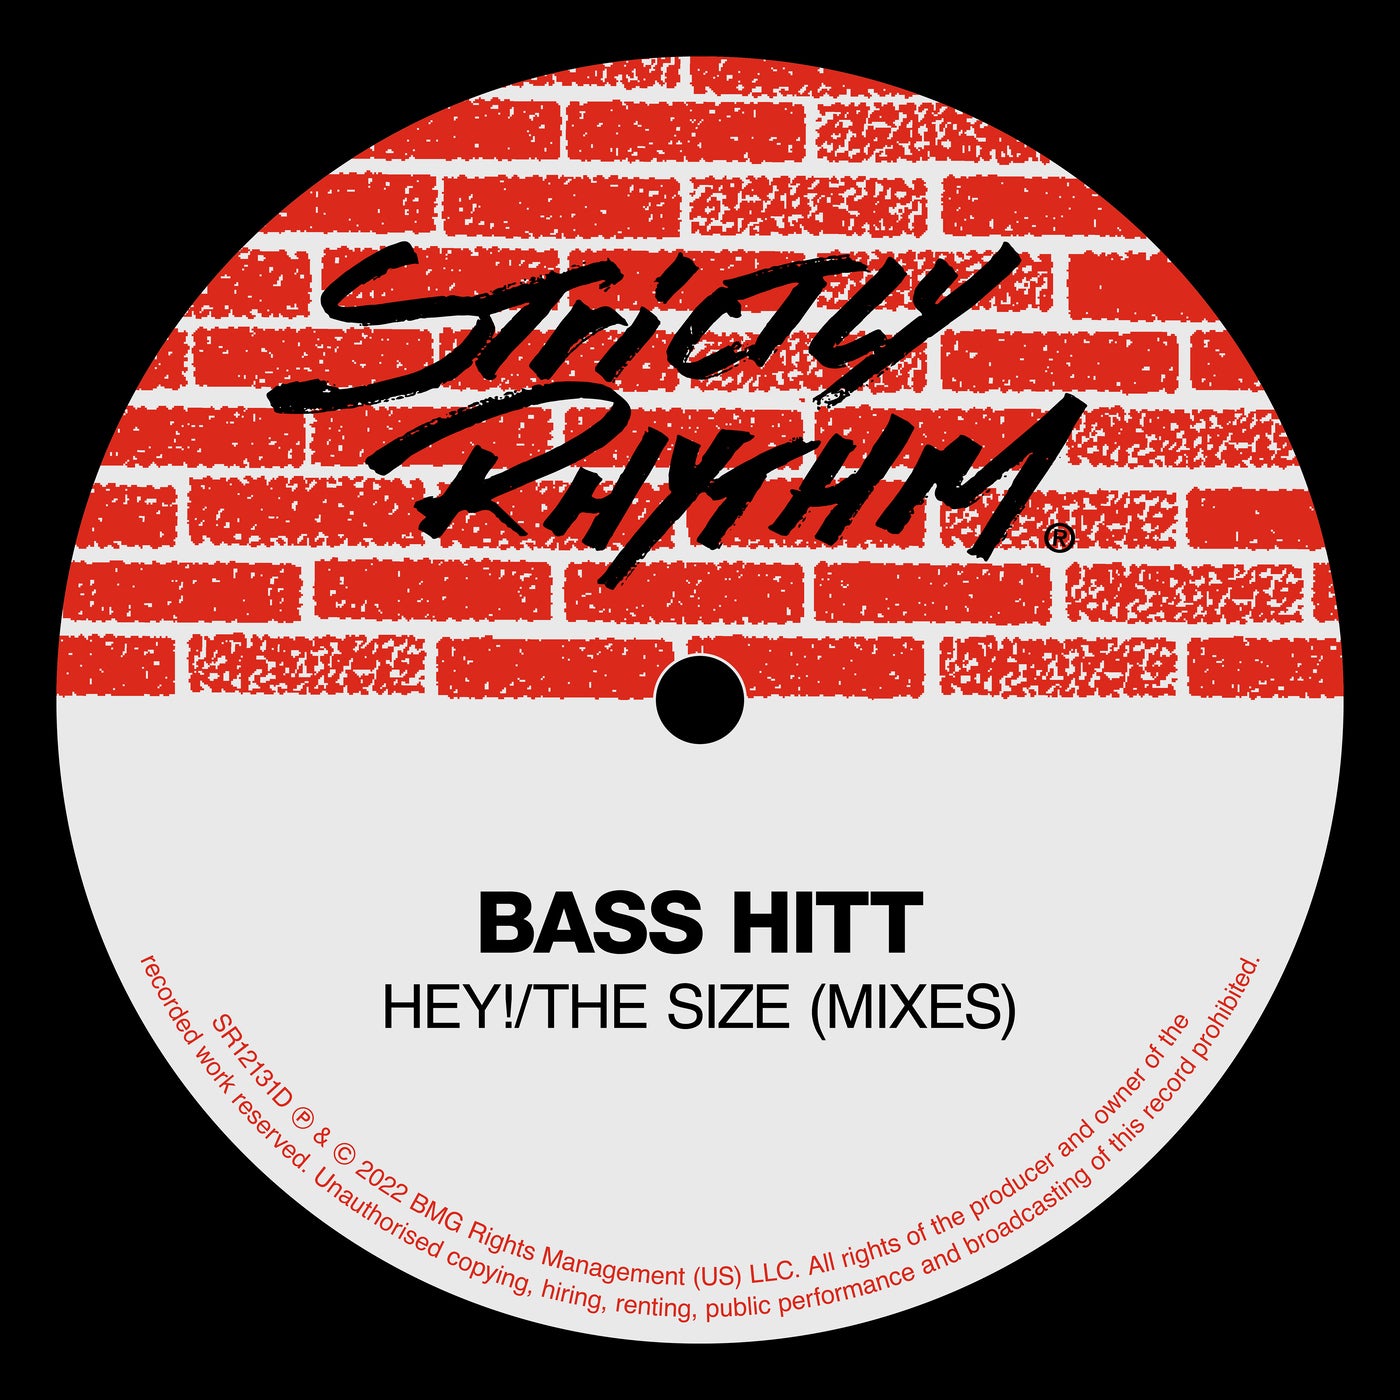 Hey! / The Size (Mixes)